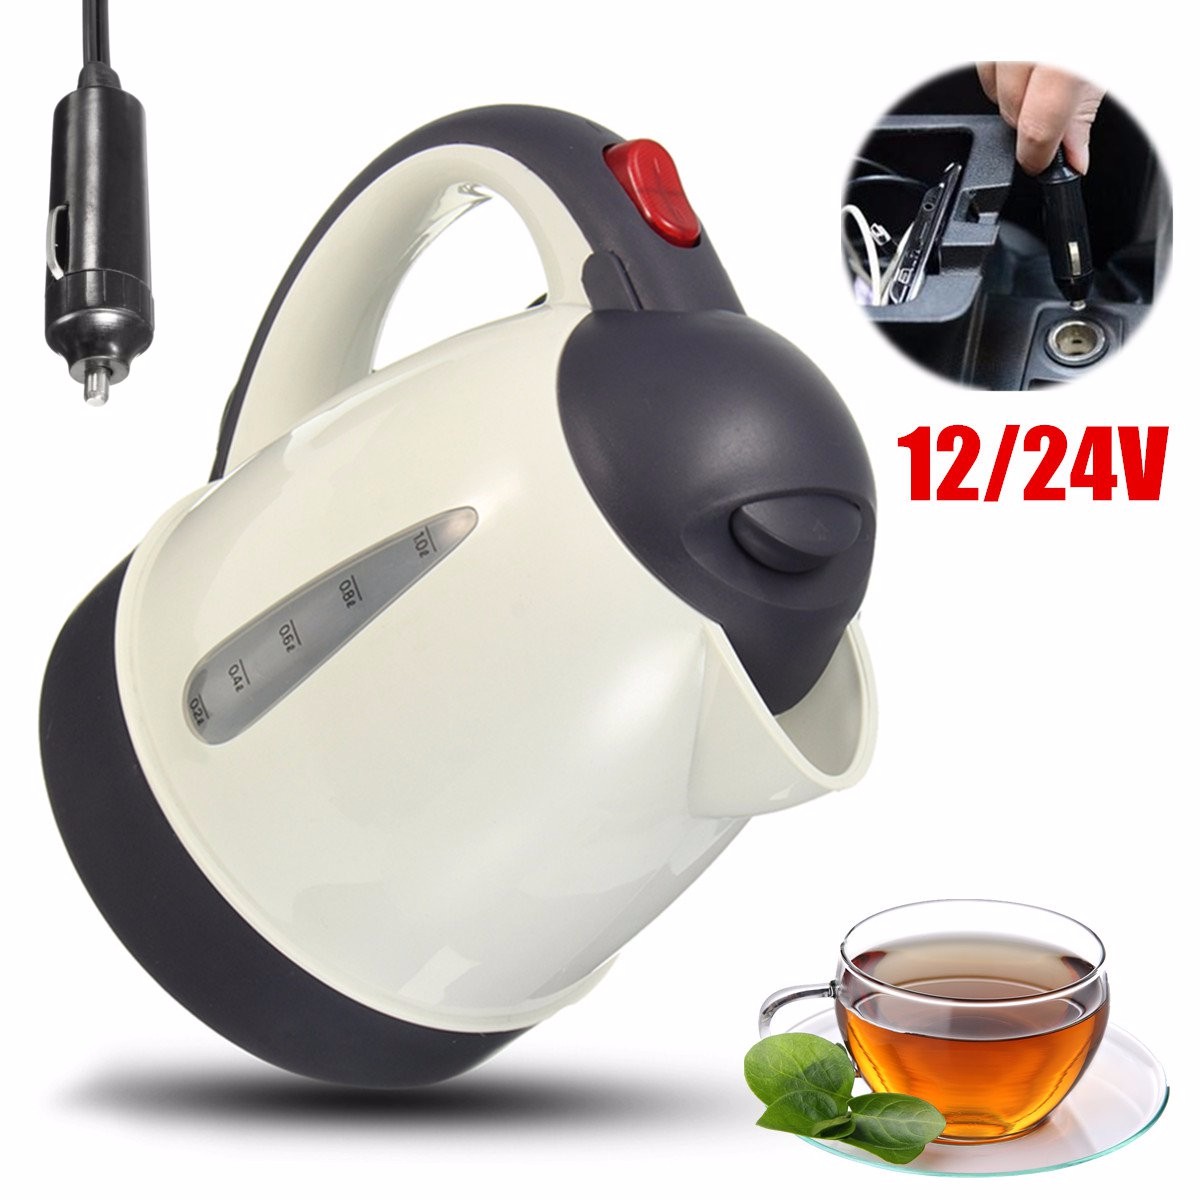 1000ml 304 Stainless Steel Car kettle Portable Auto Car Water Heater Warmer Travel Mains Kettle 12V/24V for Coffee Hot Tea